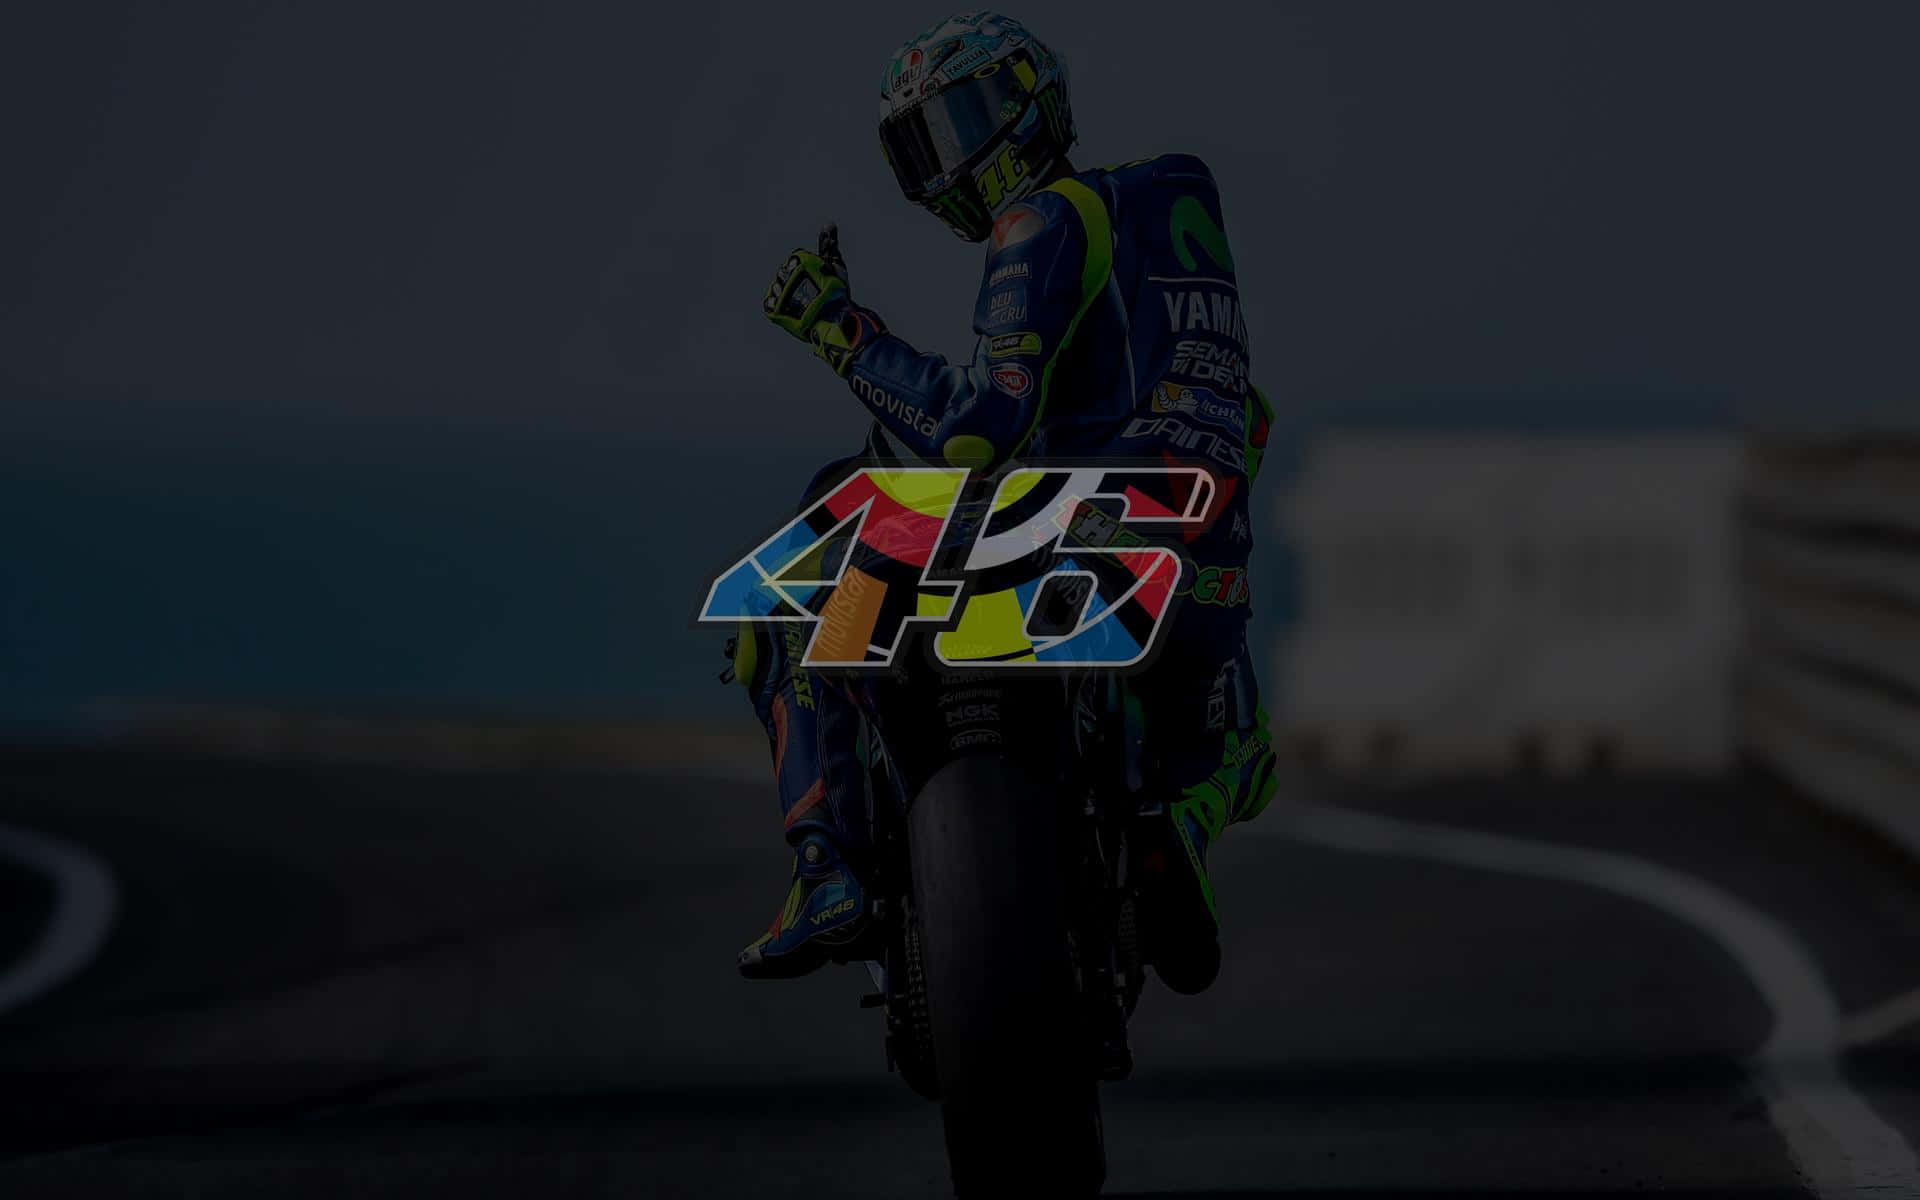 Vr46 Valentino Rossi's Racing Number Wallpaper